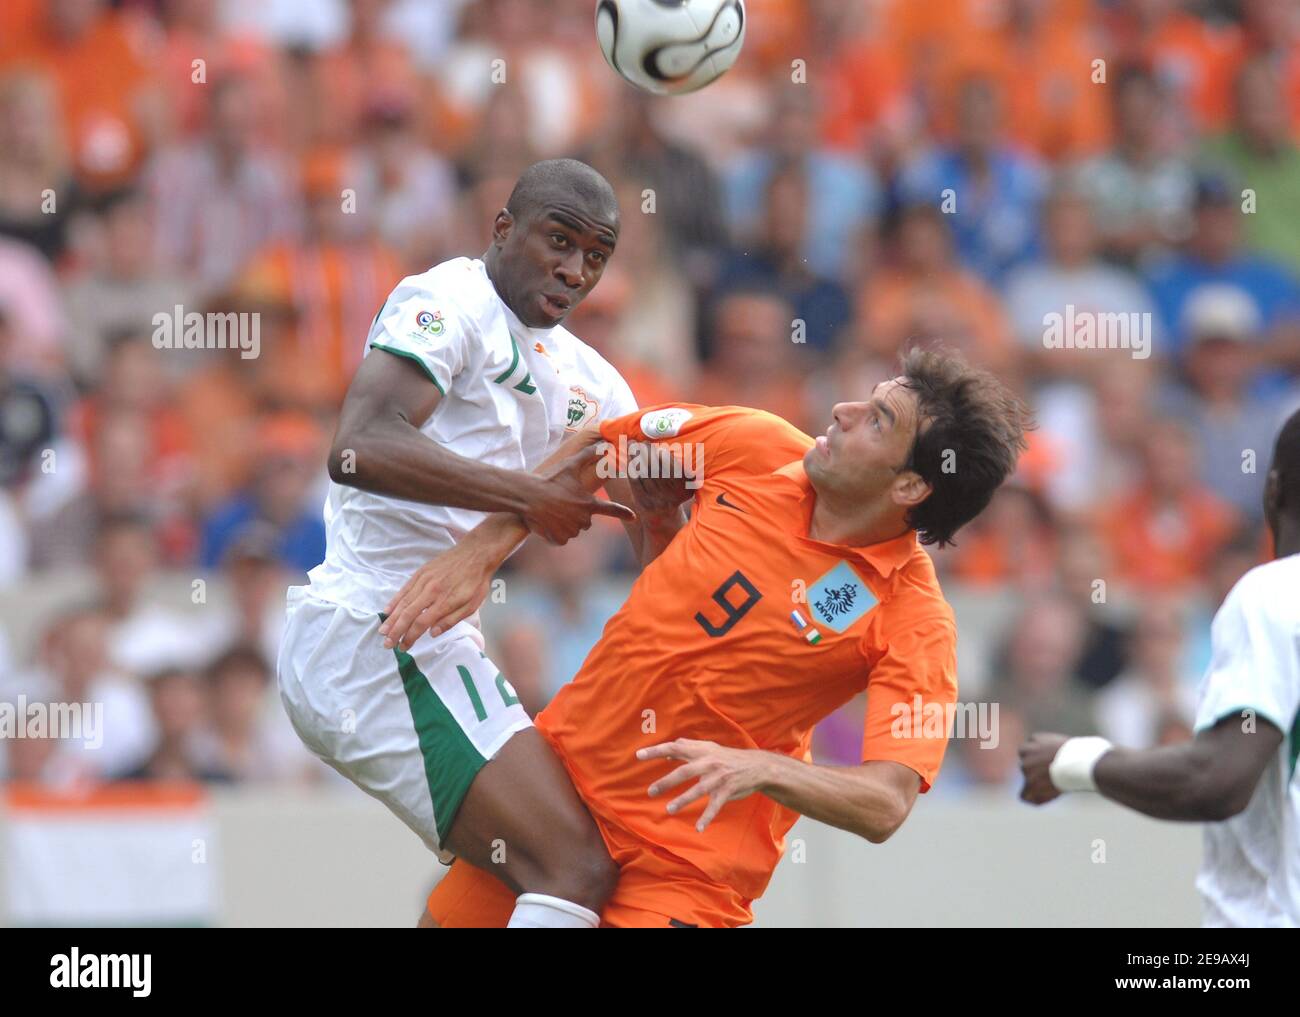 Ivory Coast's Abdoulaye Meite and Netherlands' Ruud Van Nistelrooy during  the World Cup 2006, Netherlands vs Ivory Coast at the Gootlieb Daimler  Stadion in Stuttgart, Germany on 16, 2006. Netherlands won 2-1.